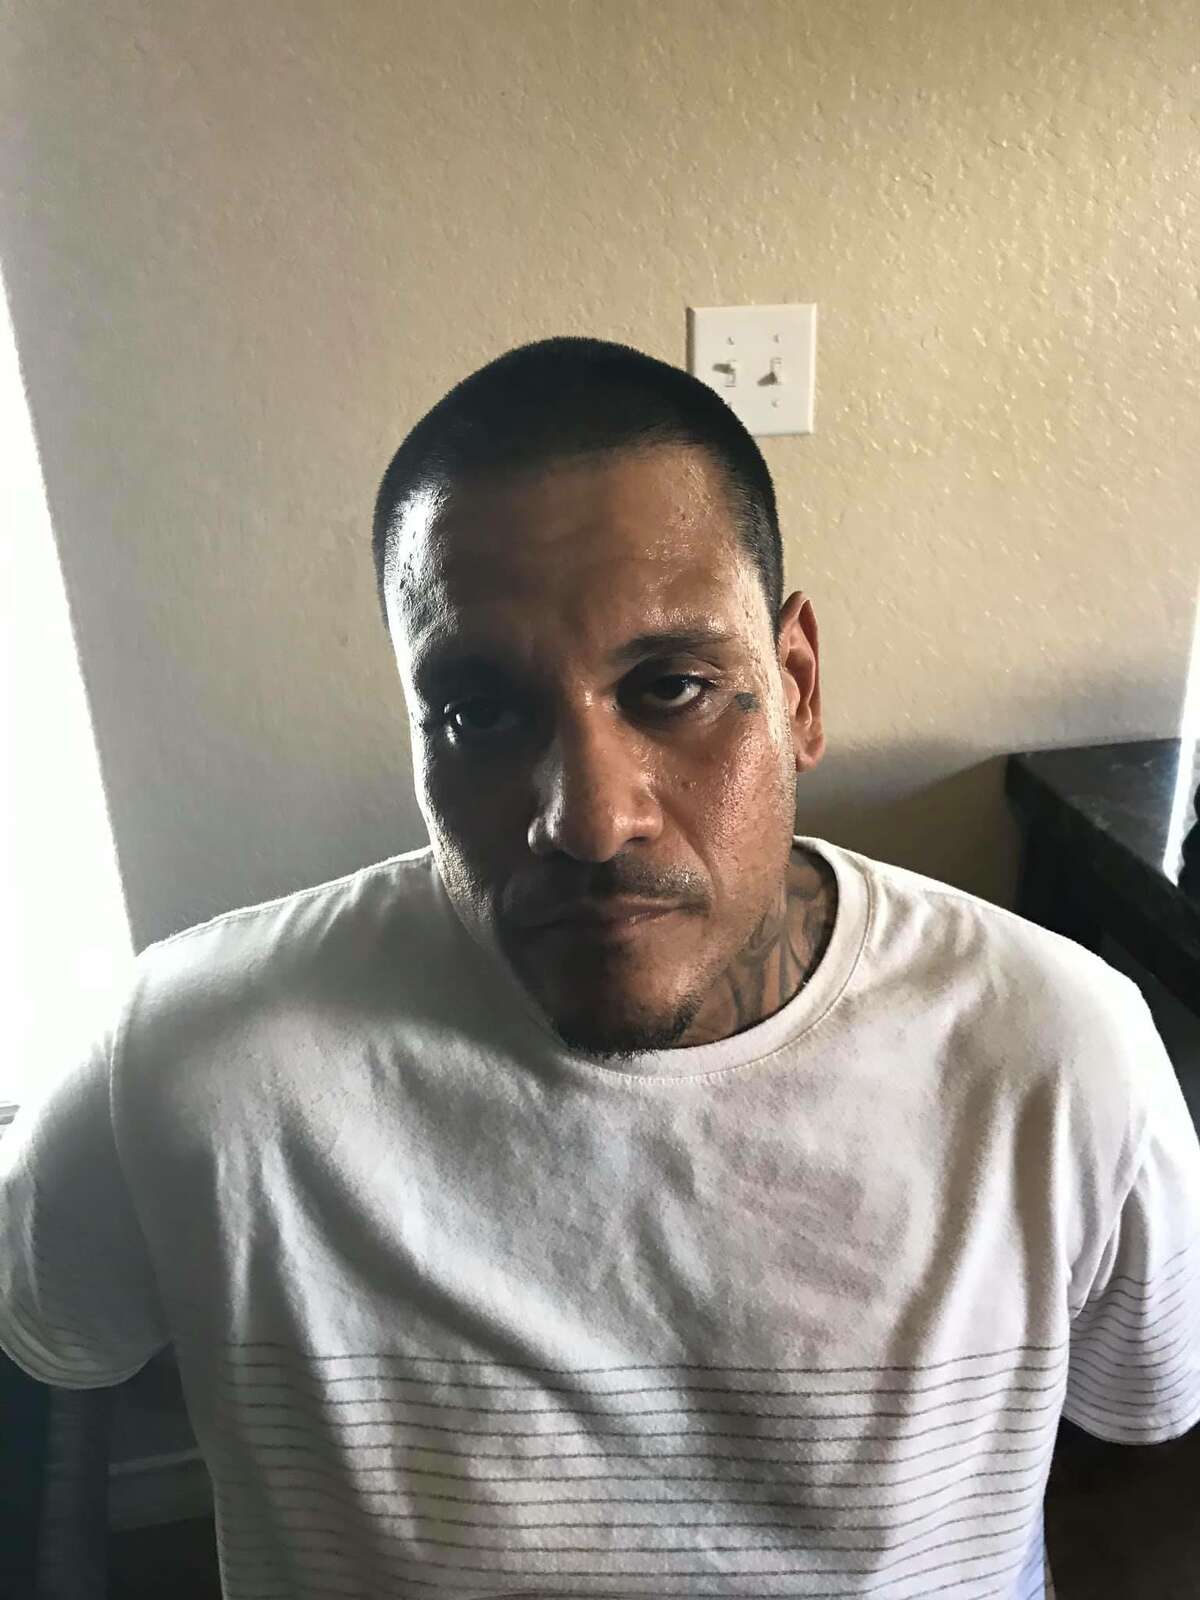 Rodger Hernandez, 42, was arrested after Bexar County Sheriff's deputies found nearly 25 pounds of methamphetamine inside a vehicle on Friday.